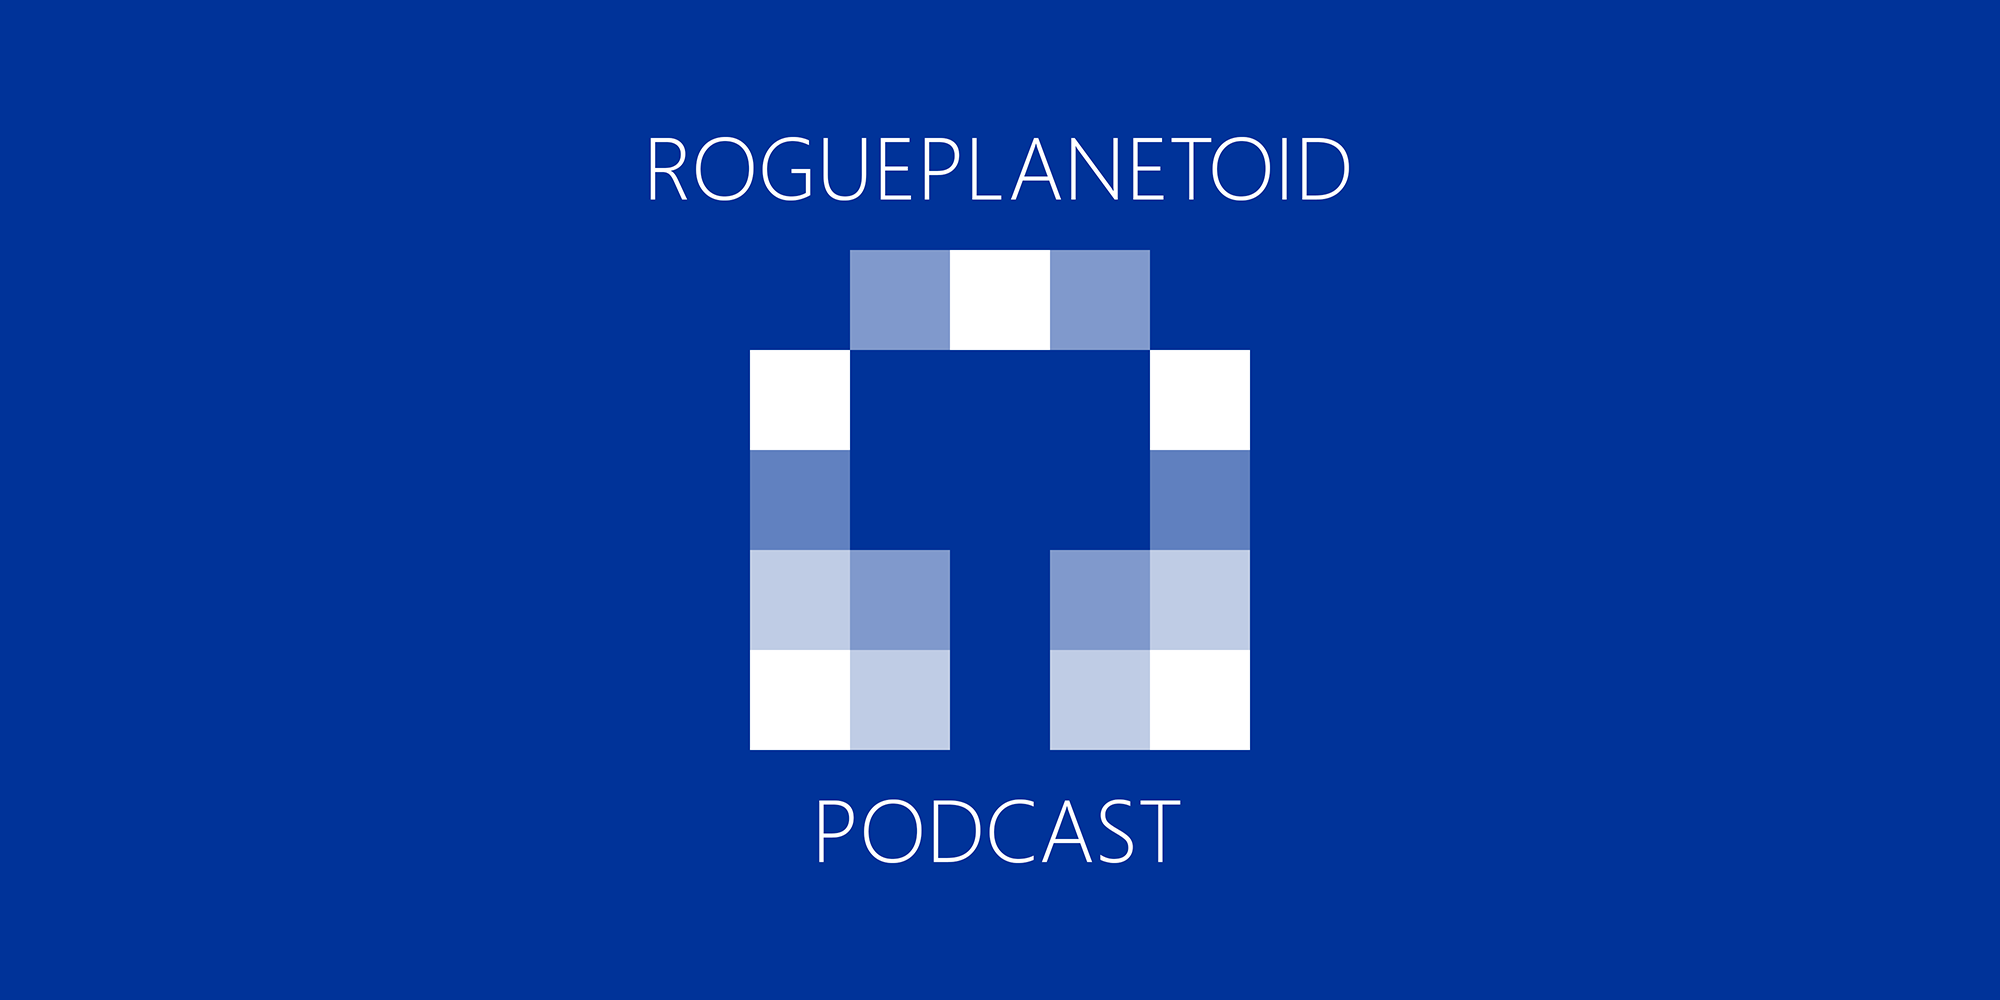 RoguePlanetoid Podcast - Episode Four - Spotify for Developers